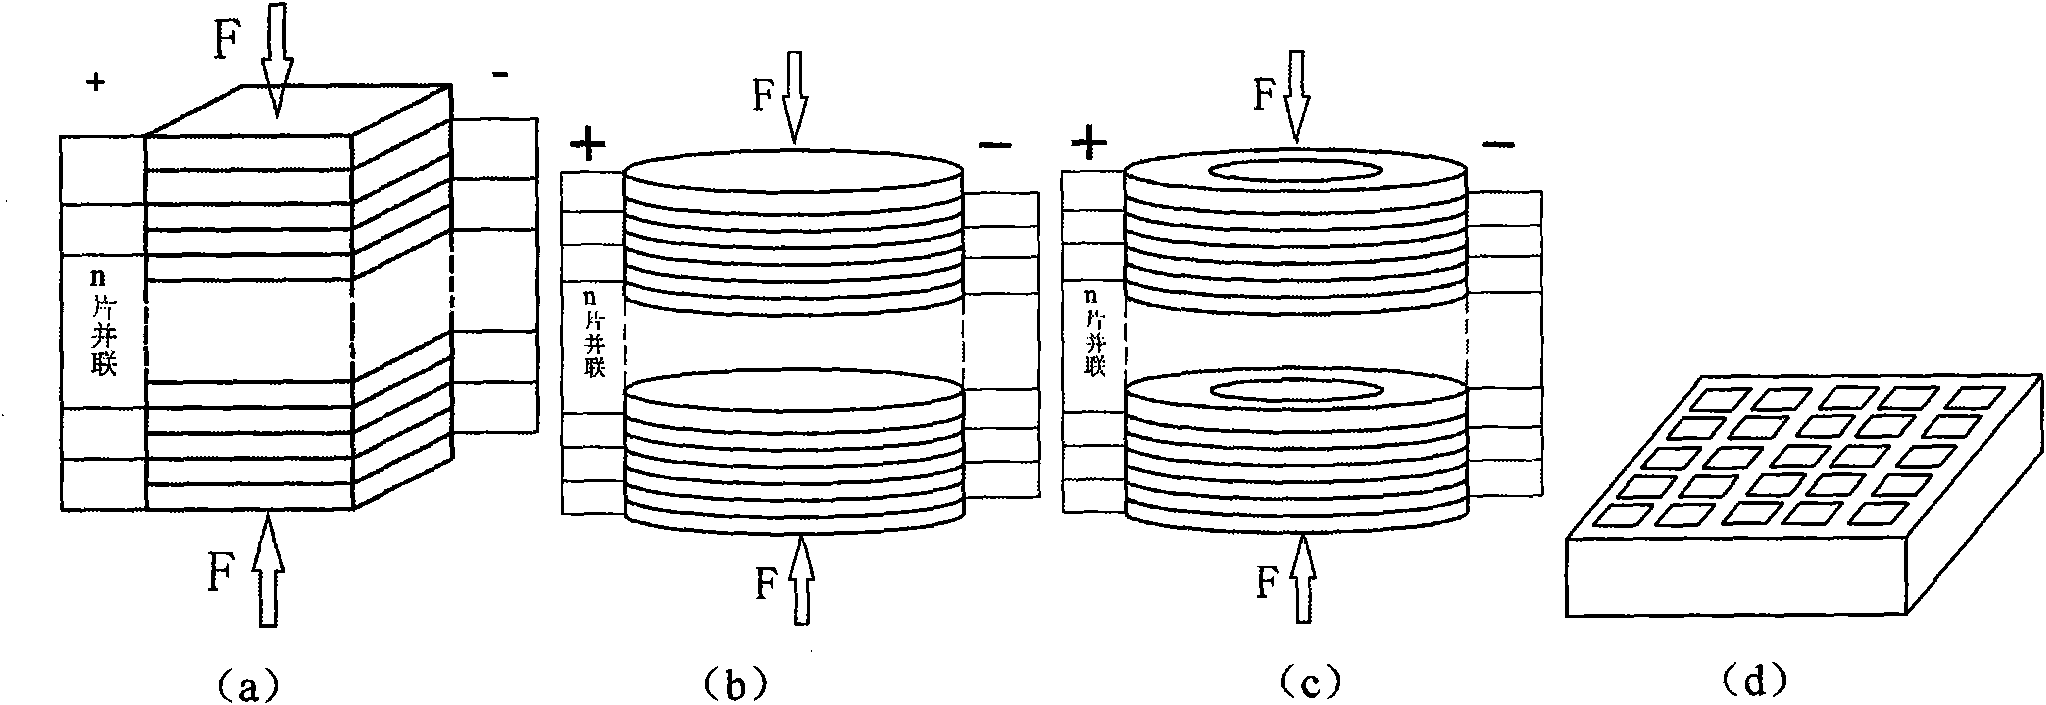 Piezoelectric self-generating unit for generating electric charge by utilizing direct piezoelectric effect